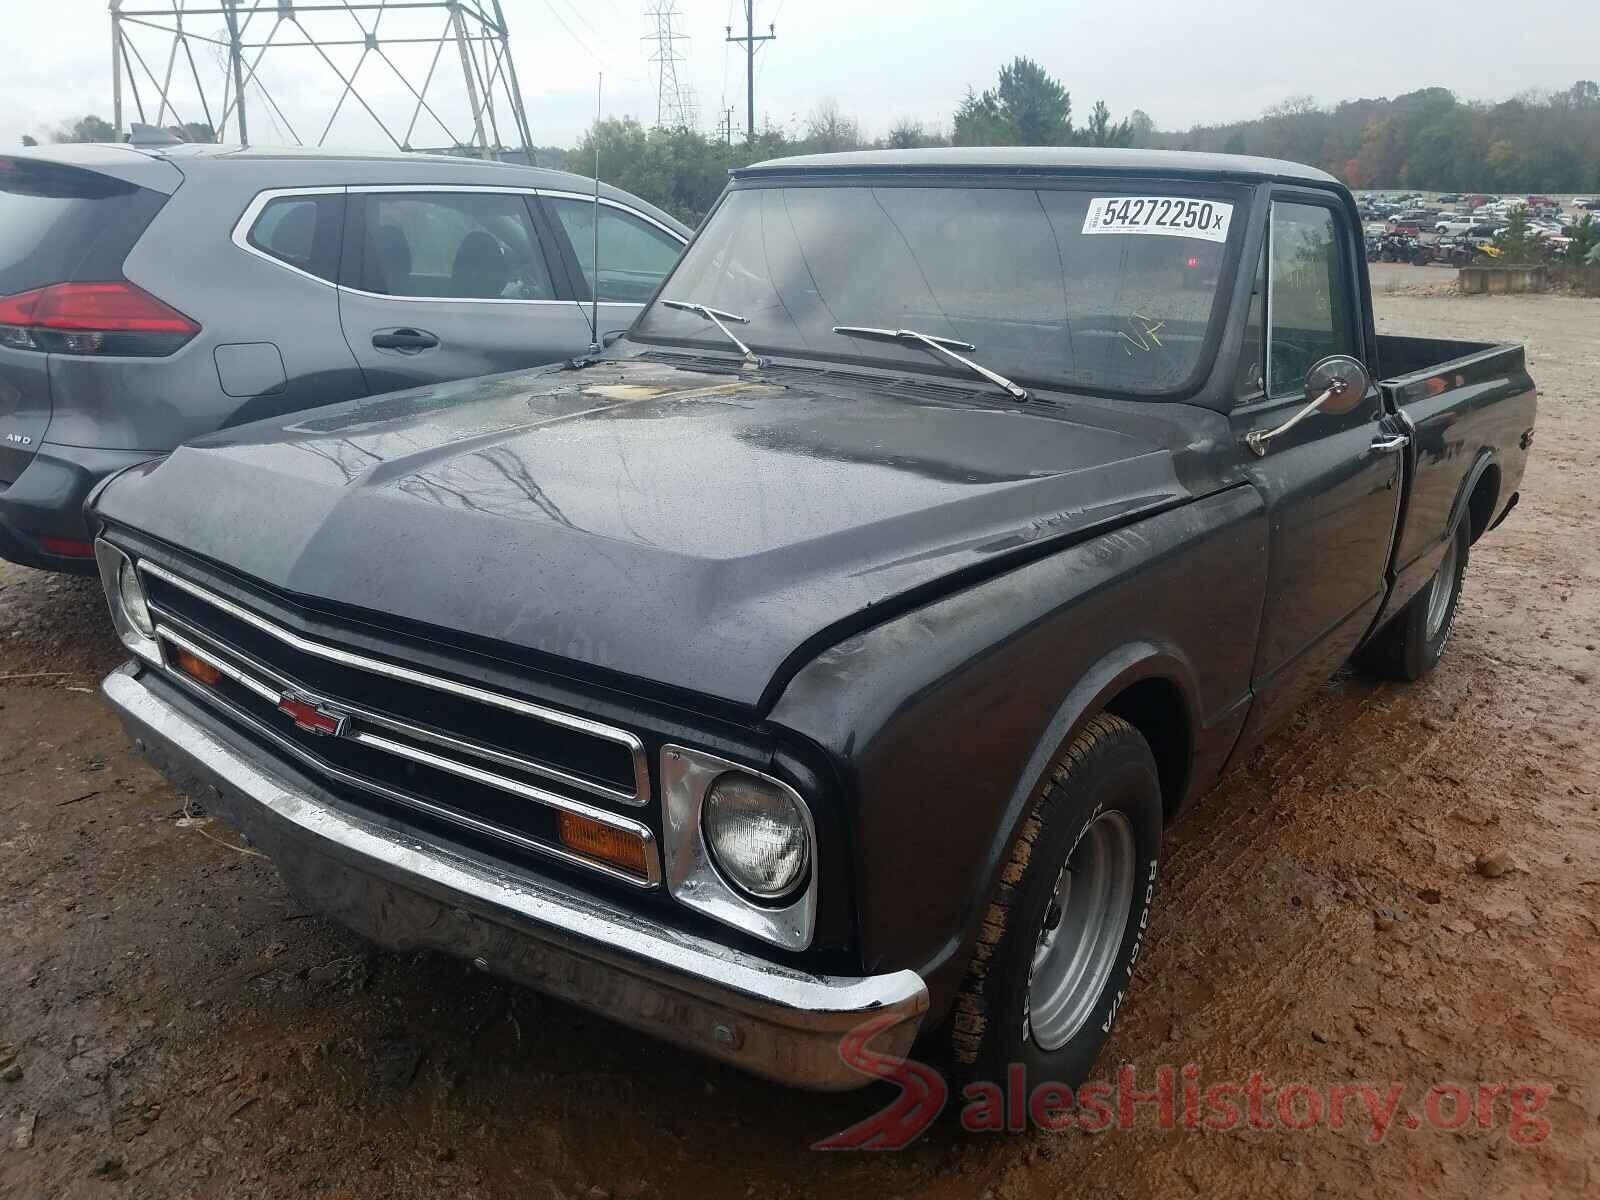 CE148A148911 1968 CHEVROLET ALL OTHER